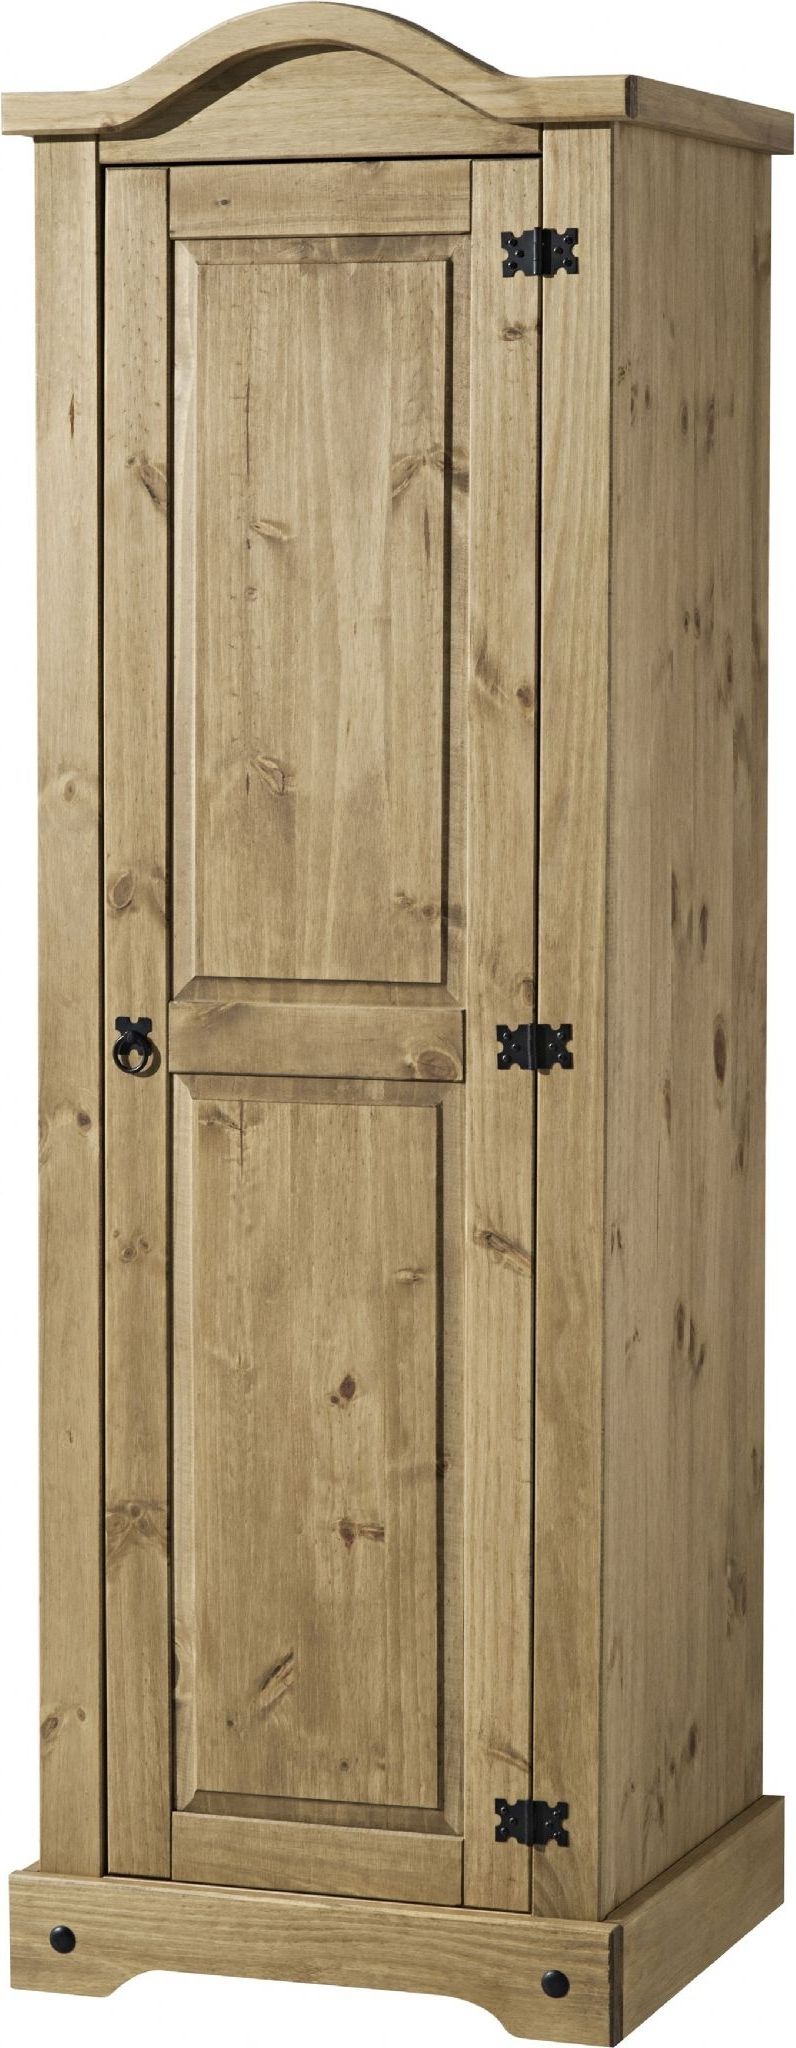 Corona Single One Mirrored Door 1 Drawer Armoire Wardrobe With Well Known Single Door Mirrored Wardrobes (View 15 of 15)